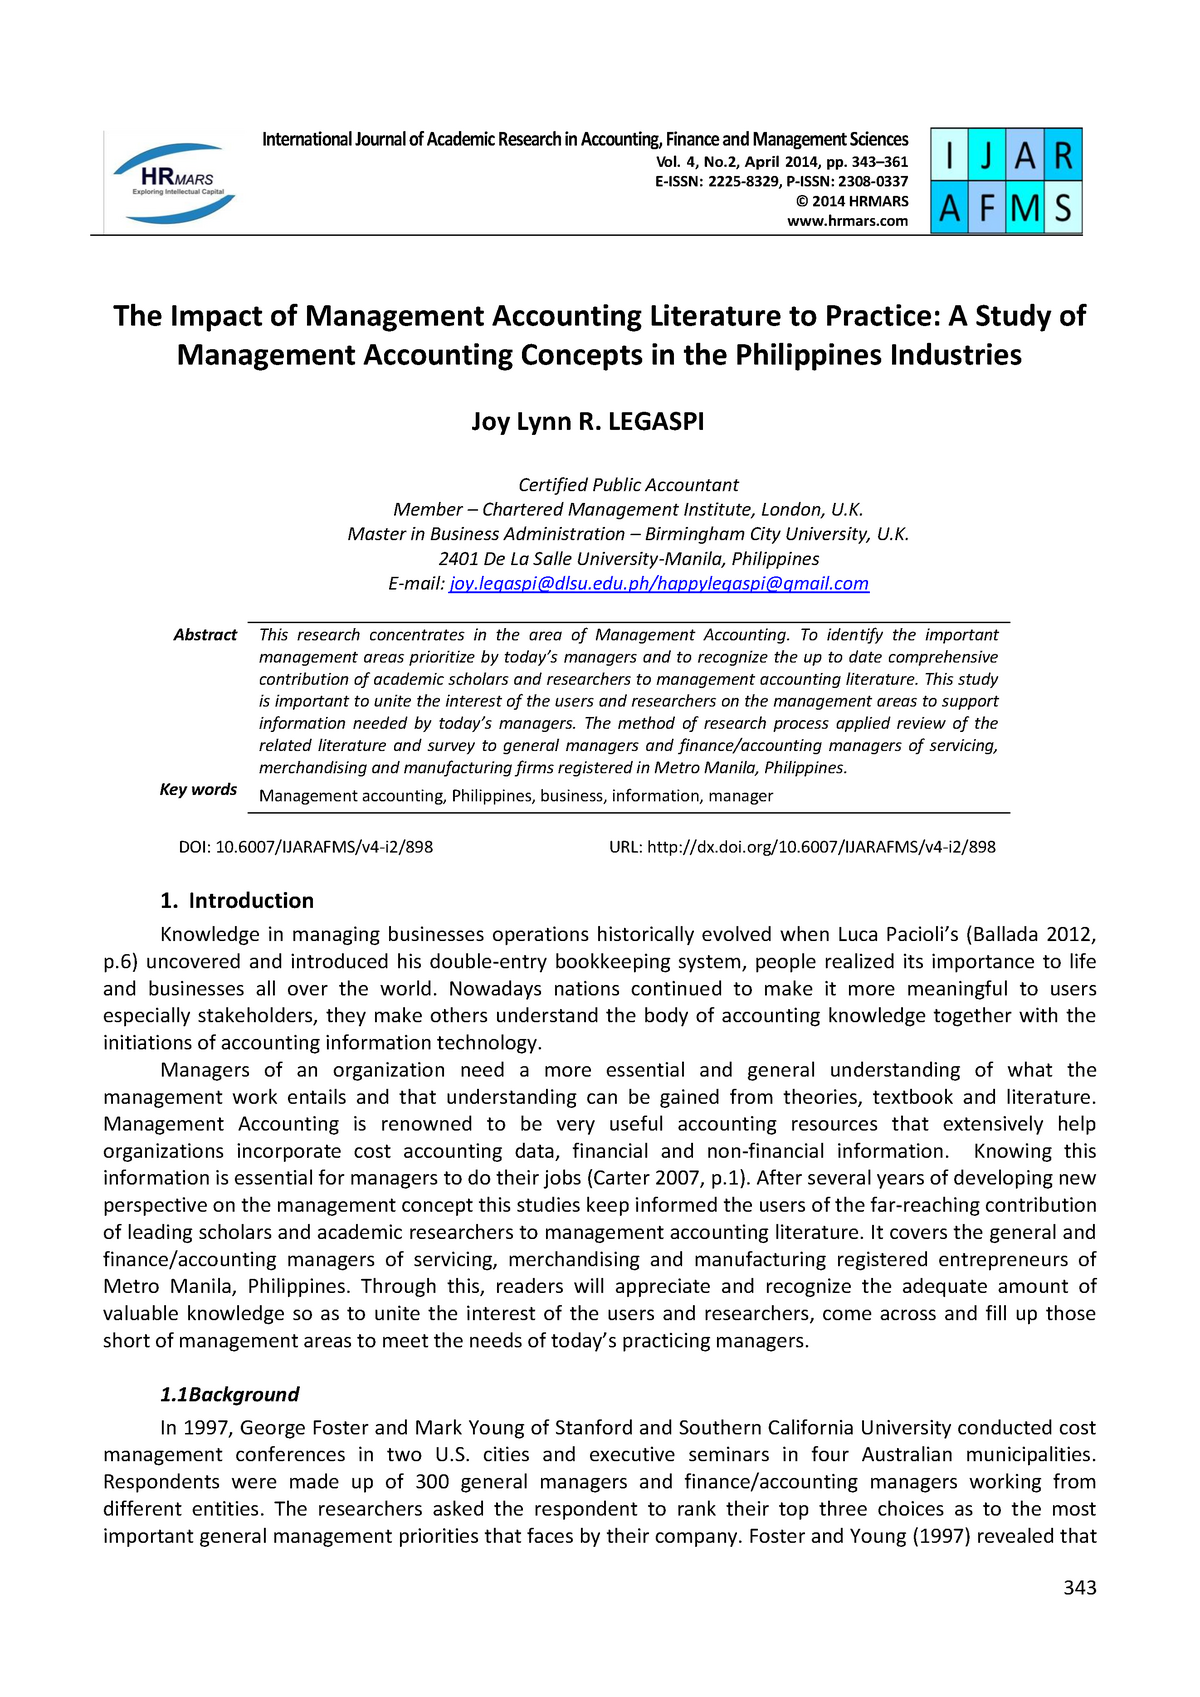 research article on management